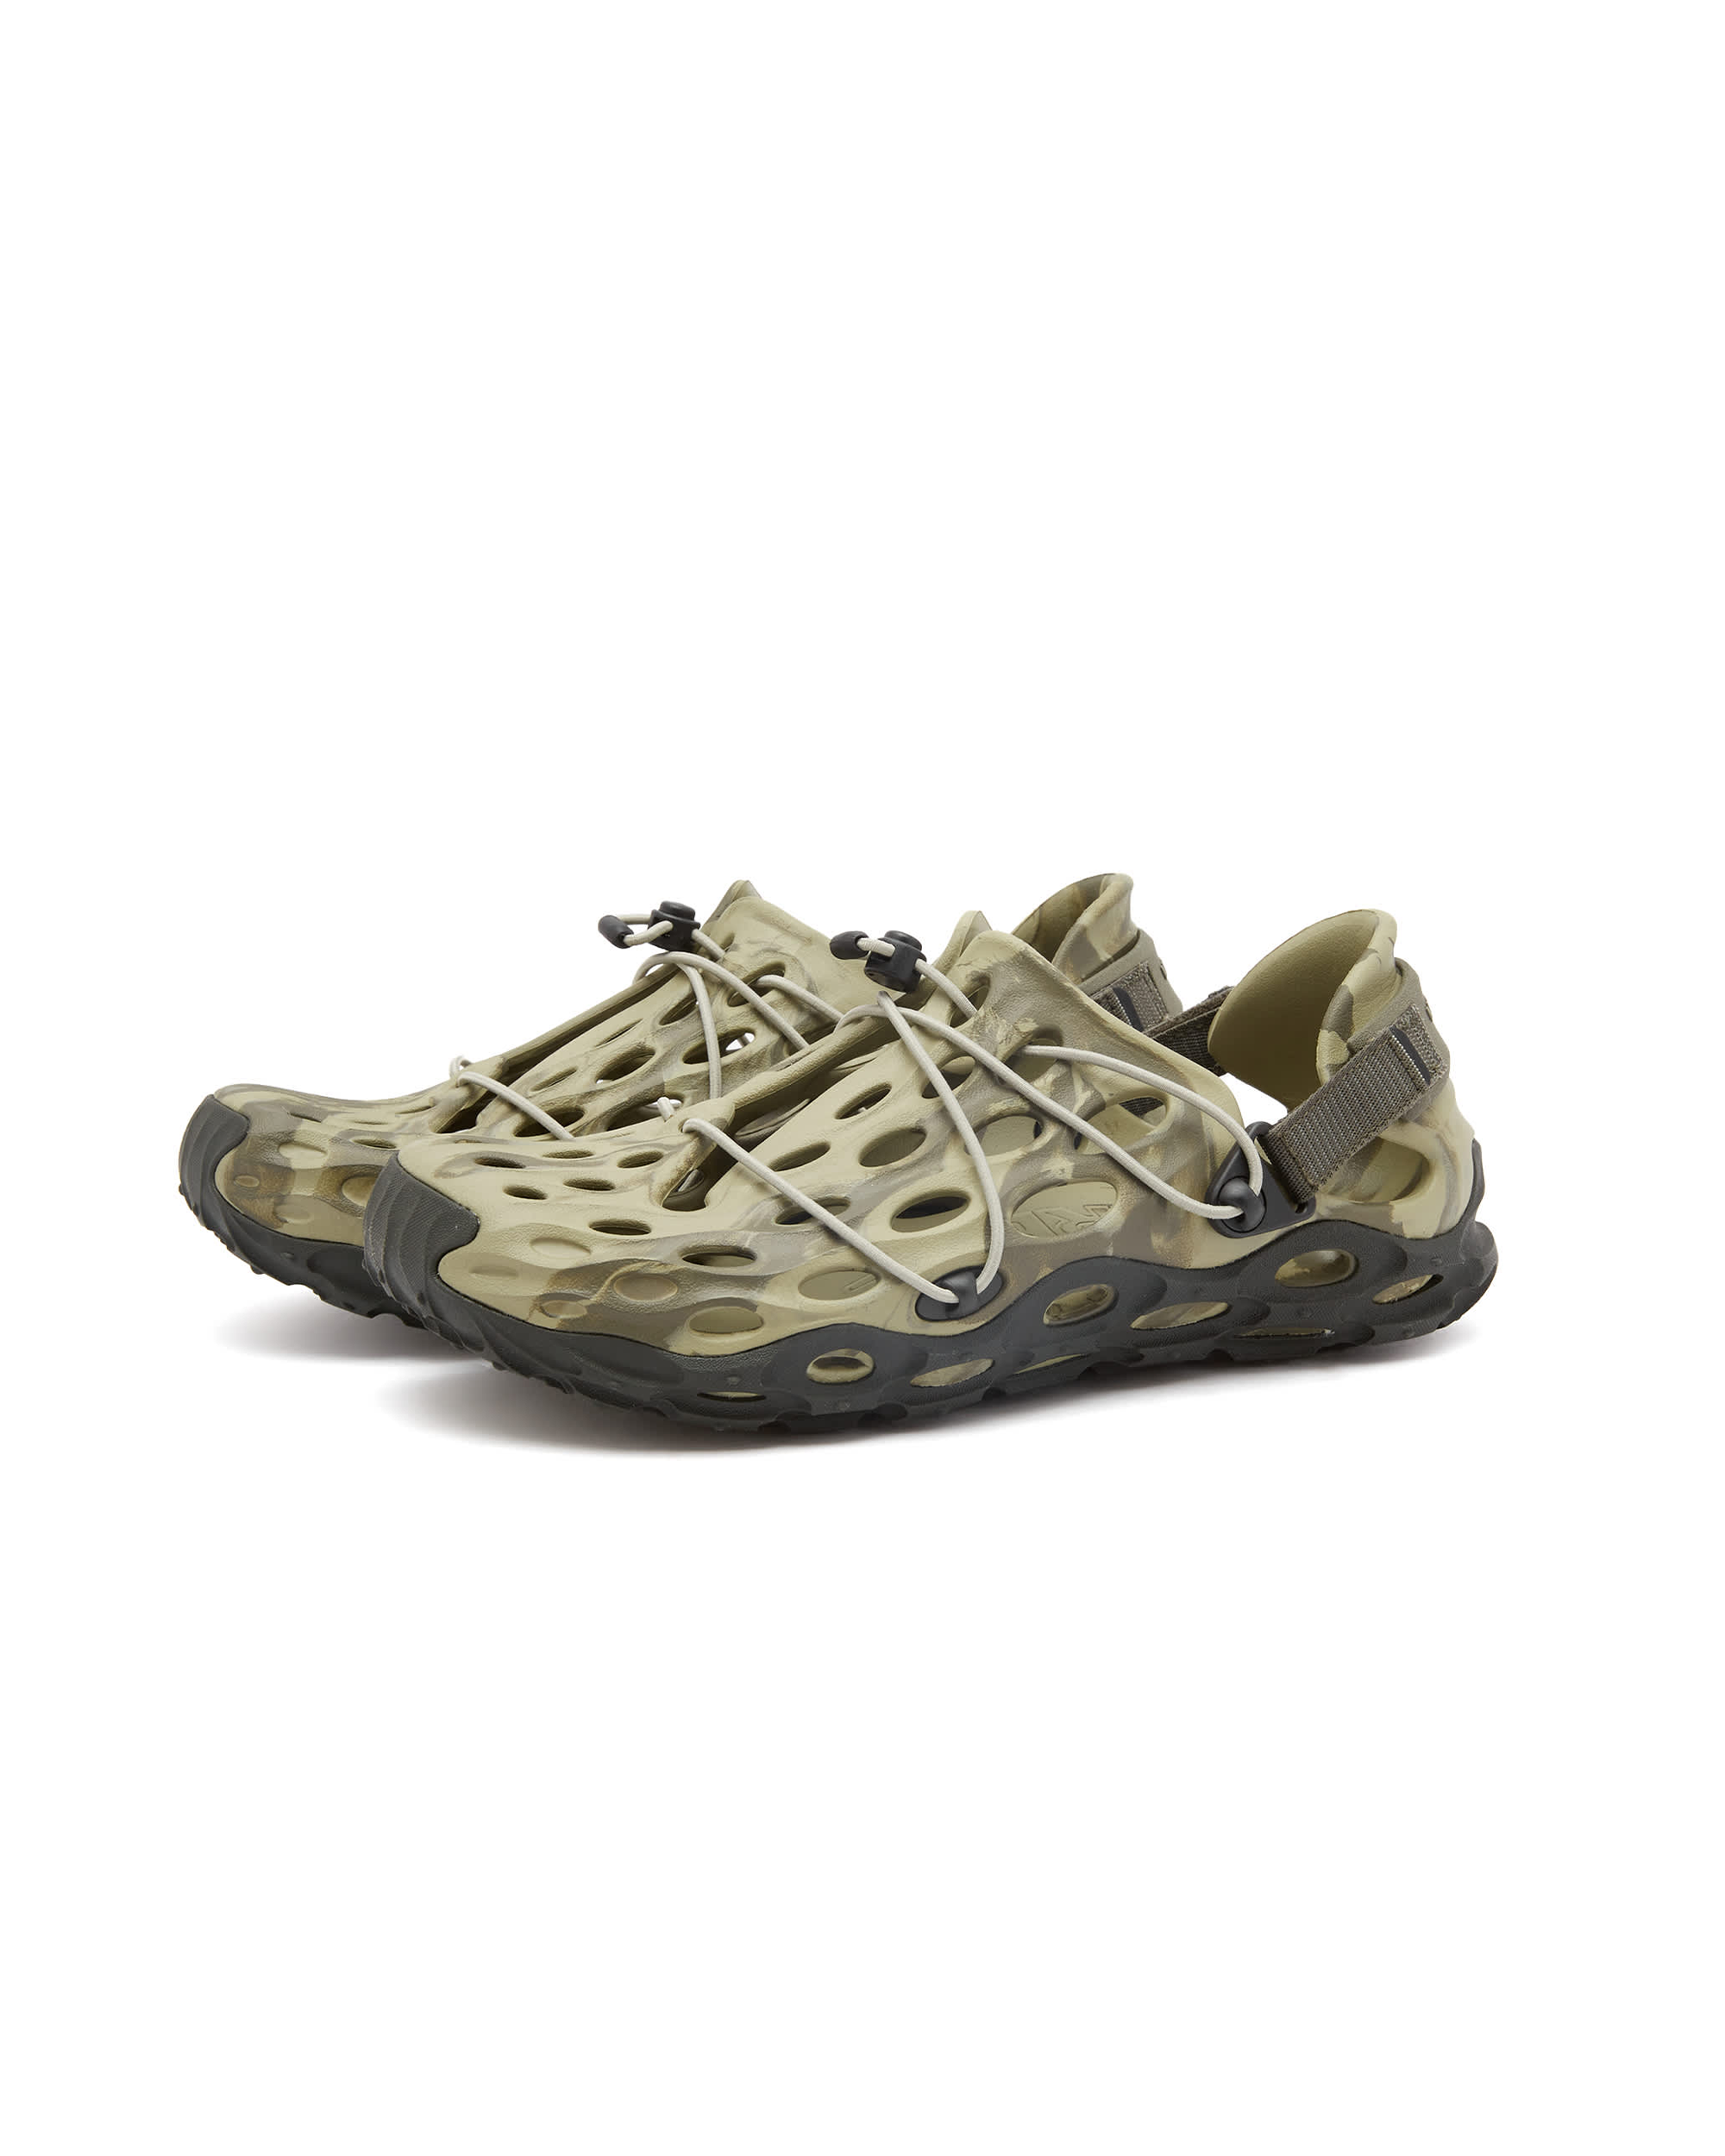 Hydro Moc AT Cage 1TRL - Olive